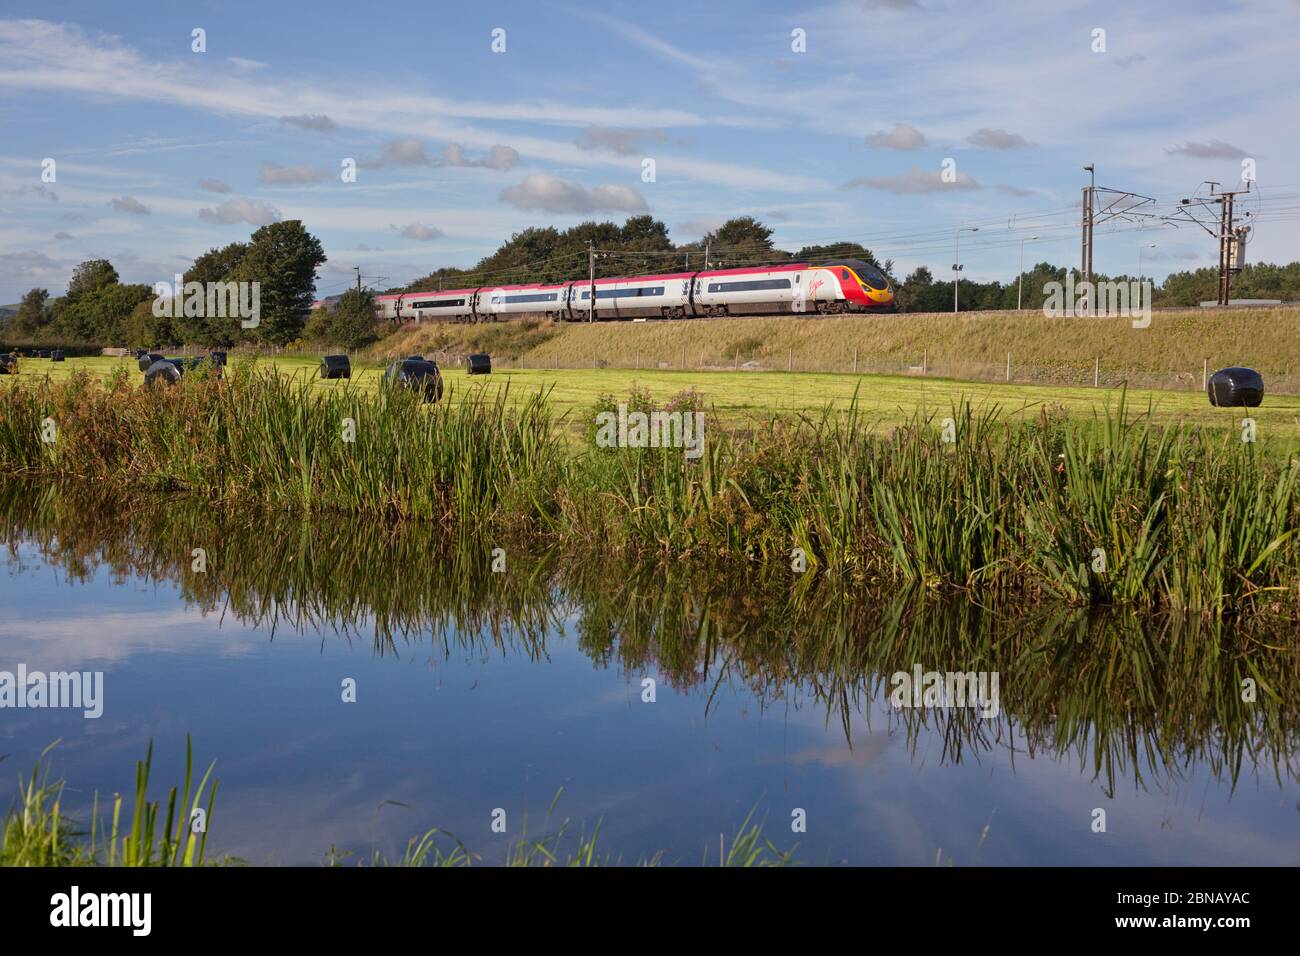 Virgin trains Alstom Pendolino train on the electrified west coast mainline in the countryside by the canal at  Catterall, Lancashire Stock Photo